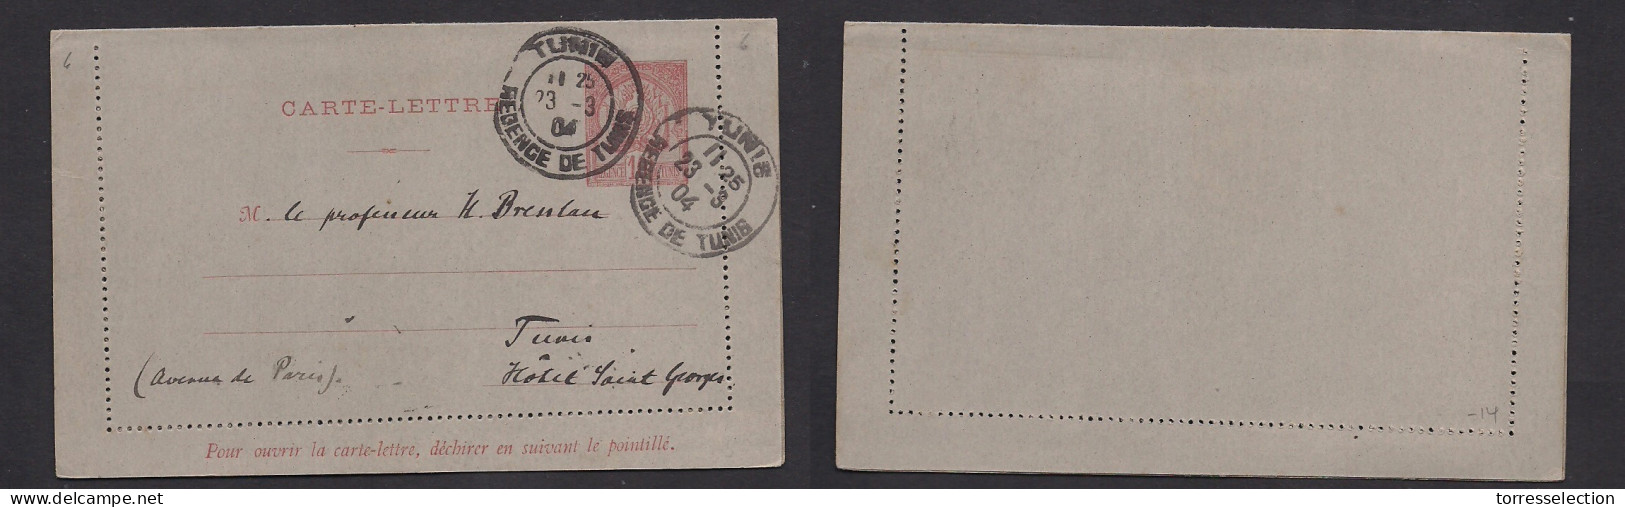 TUNISIA. 1904 (23 March) Tunis Local Usage. 10c Red / Bluish Stationary Lettersheet. Fine Used. XSALE. - Tunisia